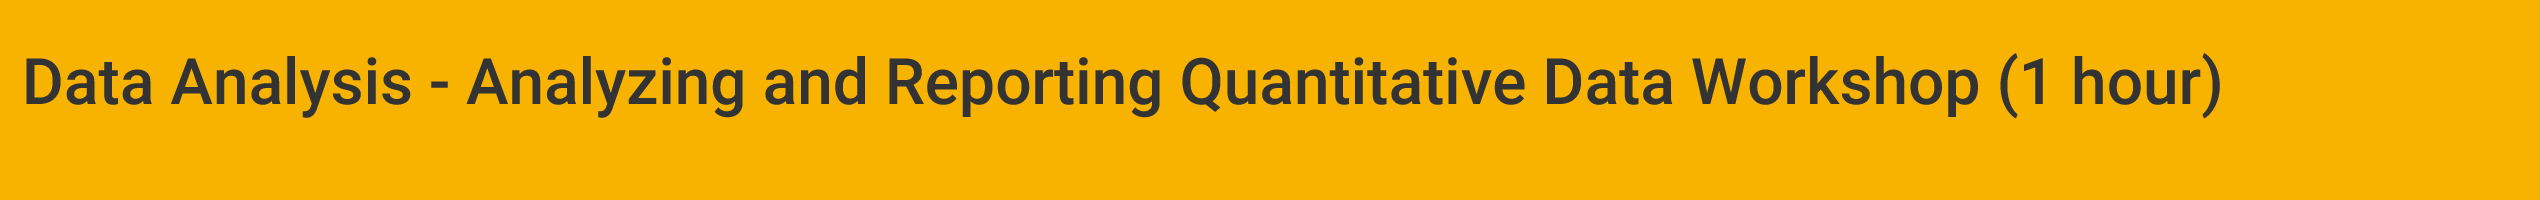 Analyzing and Reporting Quantitative Data Workshop Label